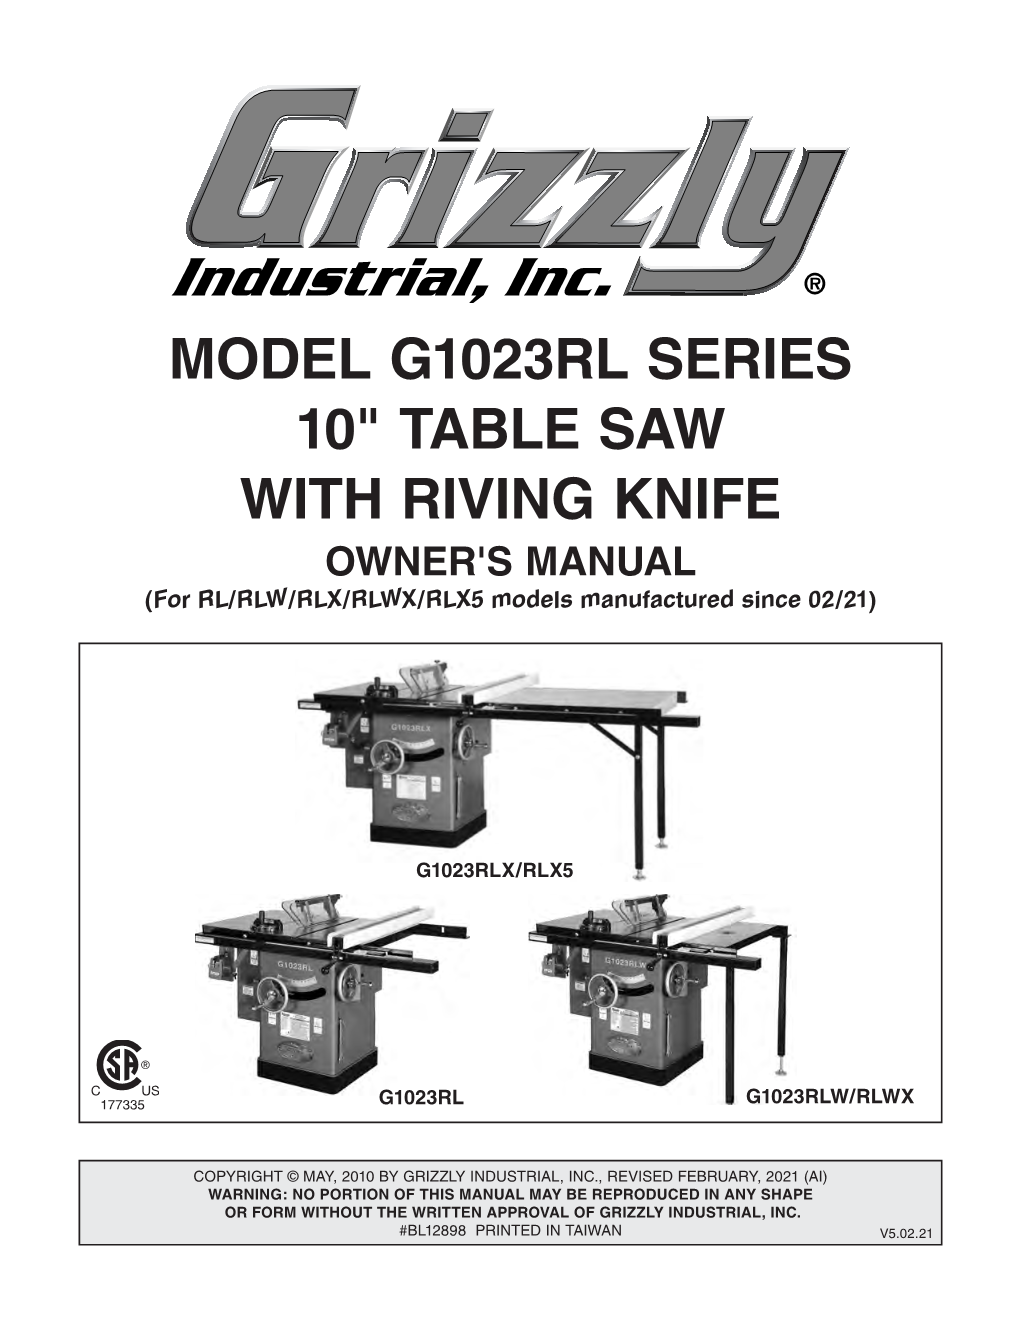 MODEL G1023RL SERIES 10" TABLE SAW with RIVING KNIFE OWNER's MANUAL (For RL/RLW/RLX/RLWX/RLX5 Models Manufactured Since 02/21)